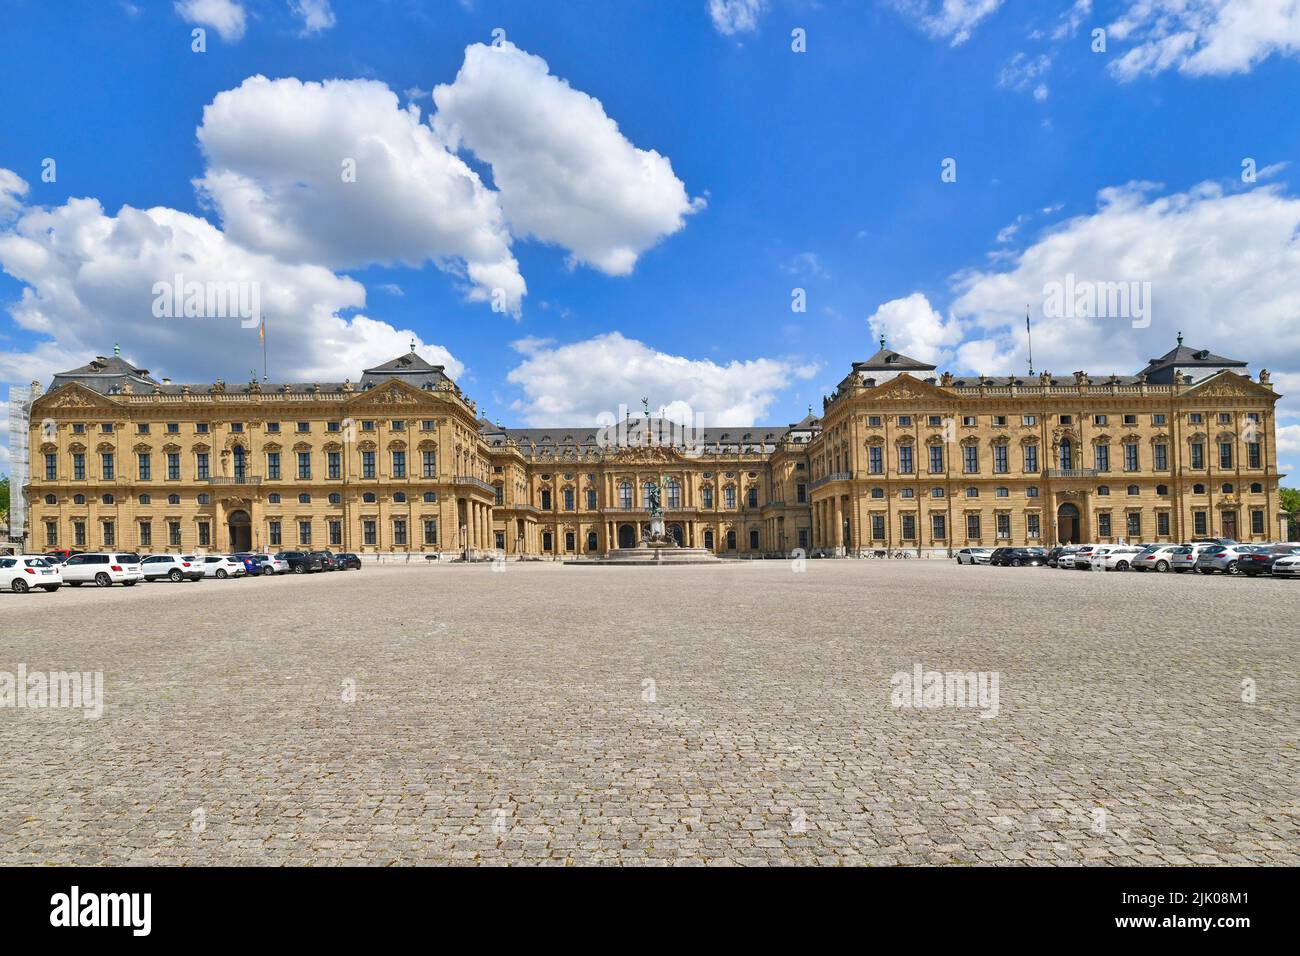 Würzburg, Germany - June 2022: Front view of historic castle 'Würzburg Residence' Stock Photo